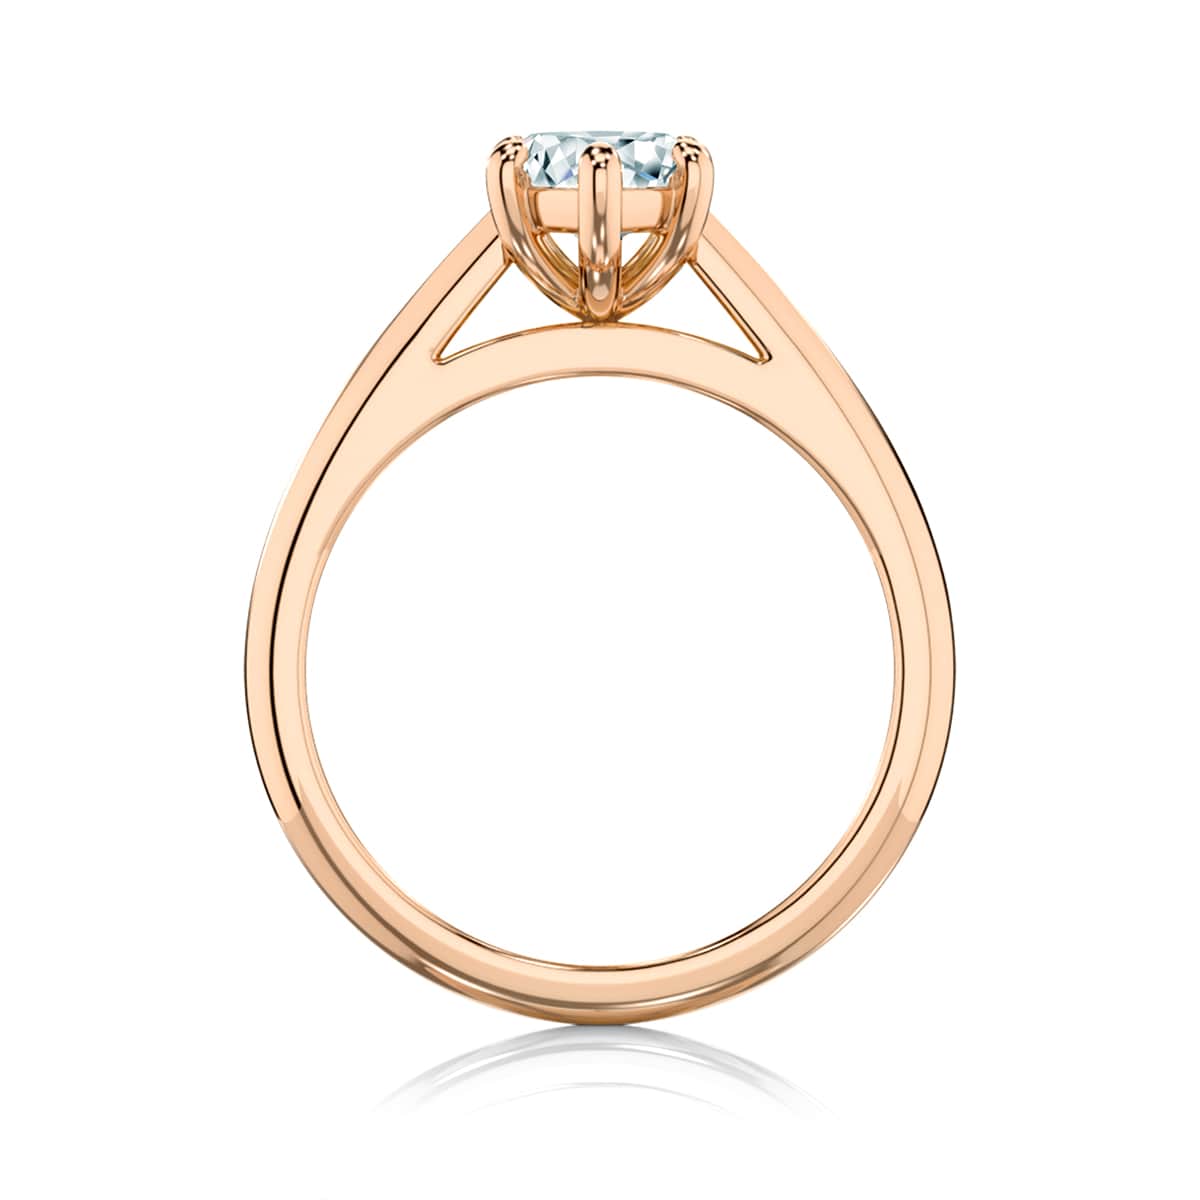 Marchesa Solitaire Marquise Diamond Engagement Ring in Rose Gold